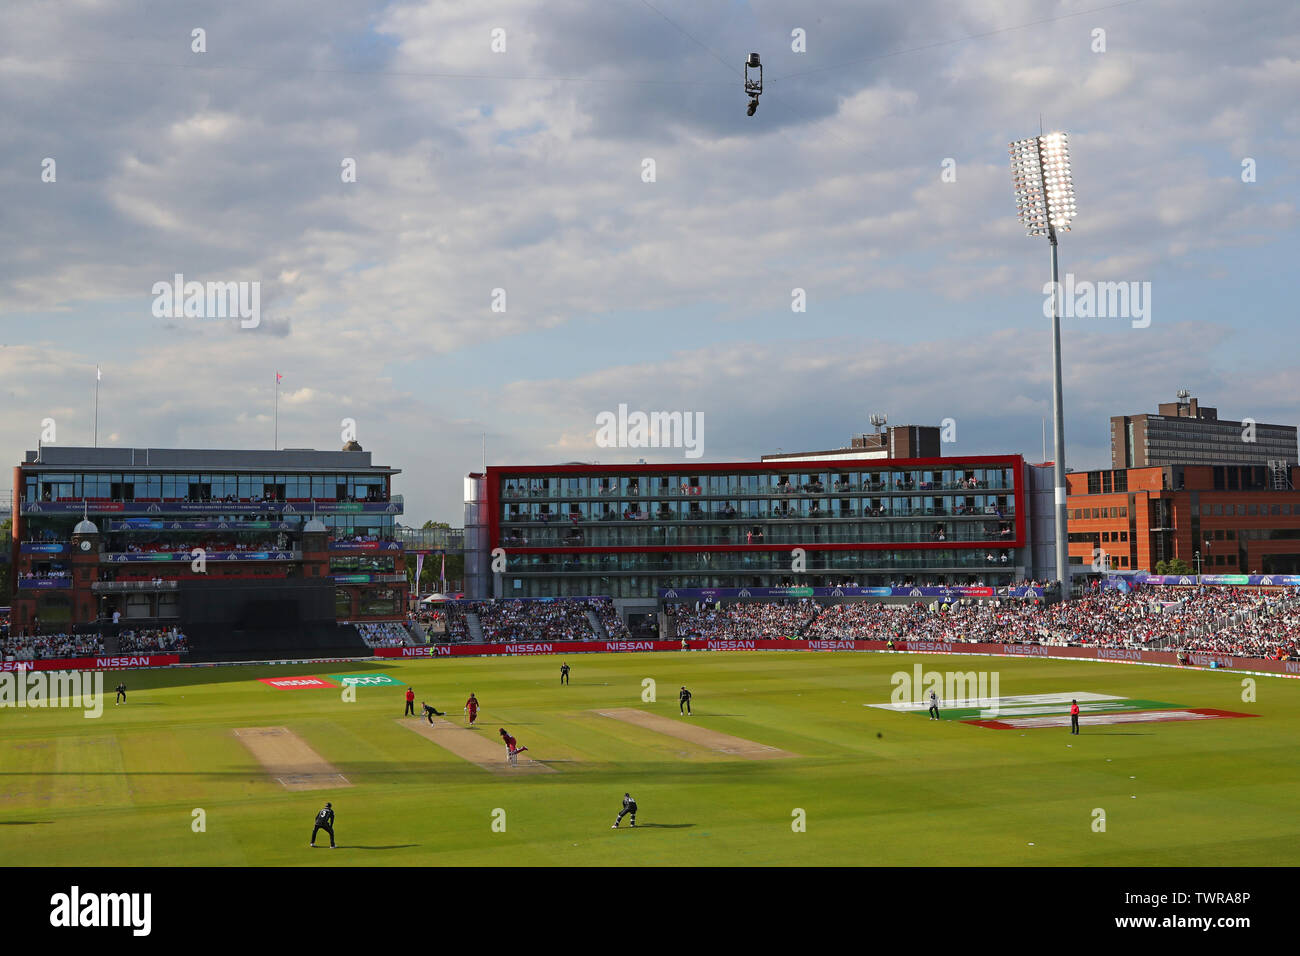 MANCHESTER, ENGLAND. 22 JUNE 2019: A general view as Trent Boult of New Zealand bowls at Chris Gayle of West Indies during the West Indies v New Zealand, ICC Cricket World Cup match, at Old Trafford, Manchester, England. Stock Photo